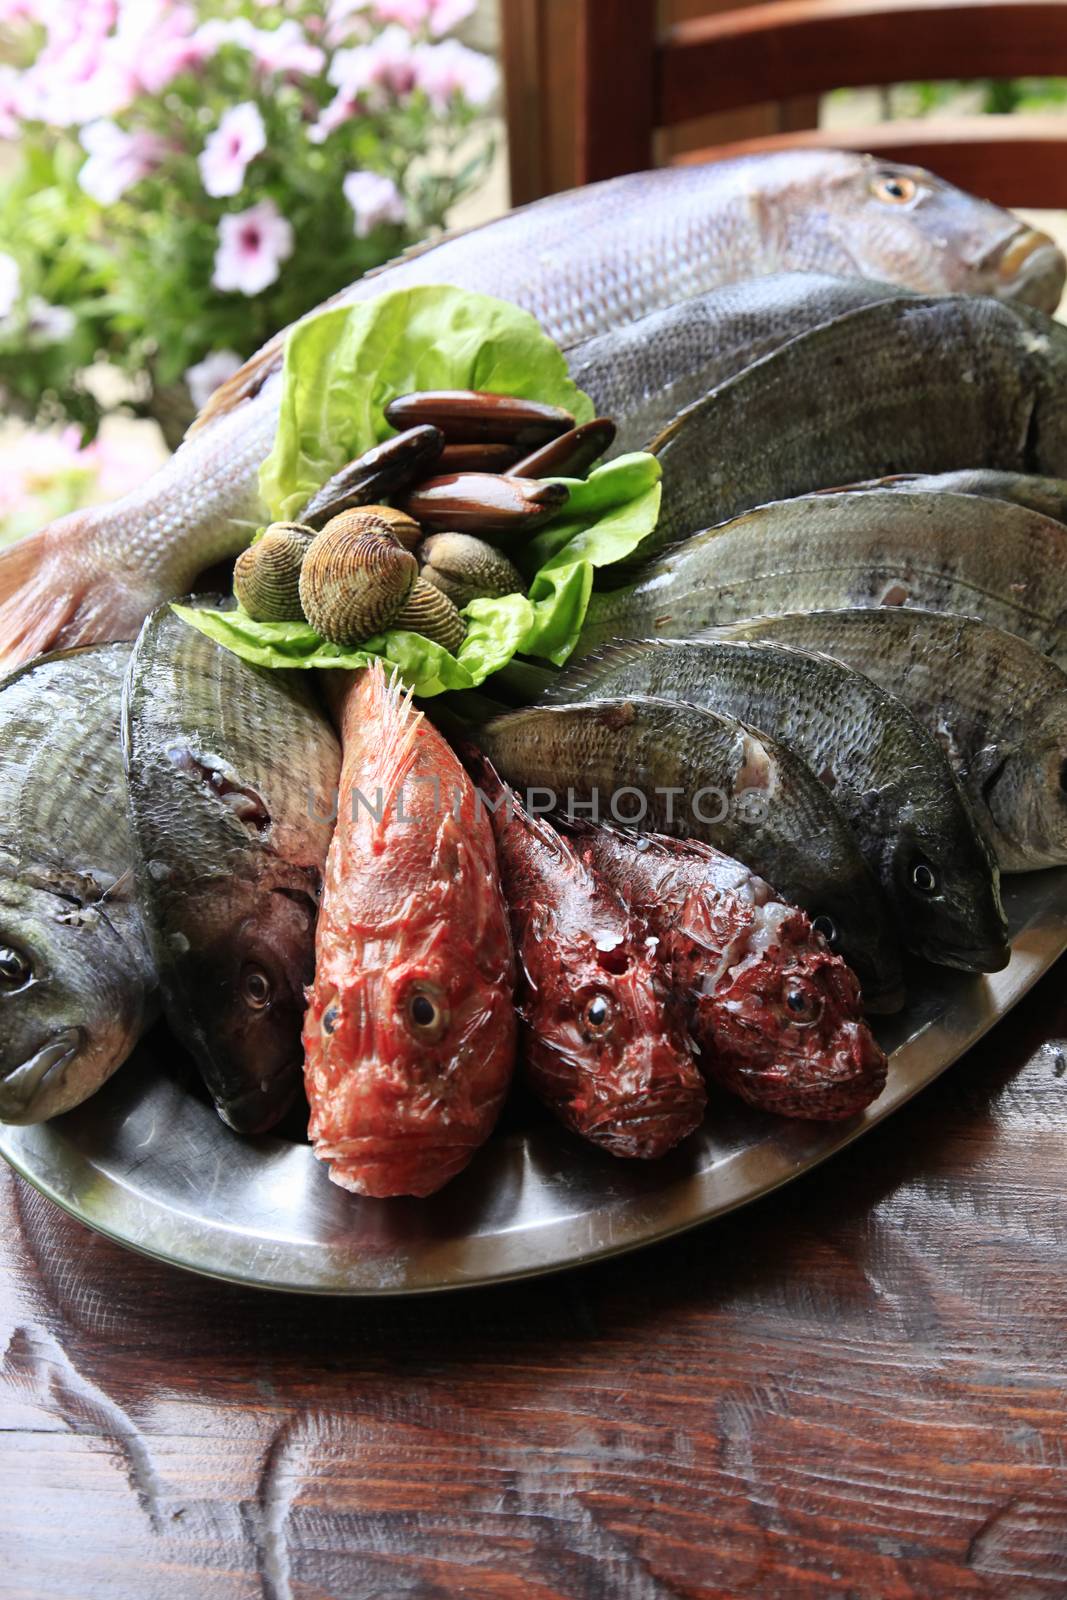 Fresh fish onon a metal tray for sale